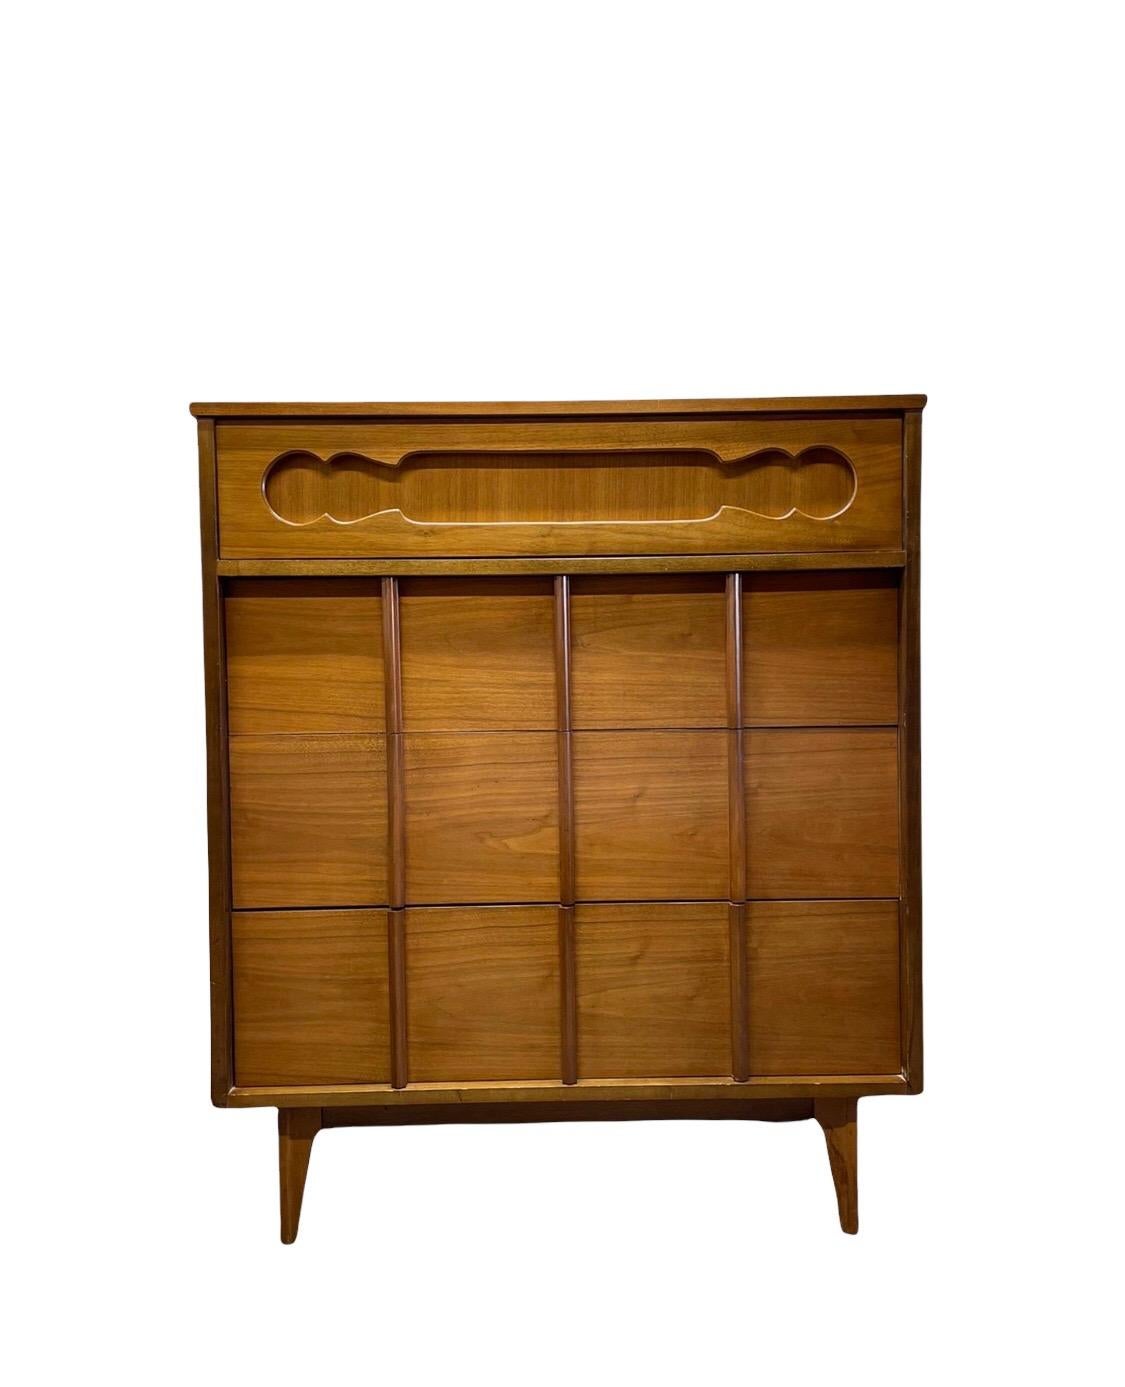 An elegant Mid-Century Modern four drawer dresser. The dresser features gorgeous walnut wood grain and sleek mid-century design. It offers ample room for storage, with four dovetailed drawers and original.

Dimensions: 36 W 18 D 43 H.

   